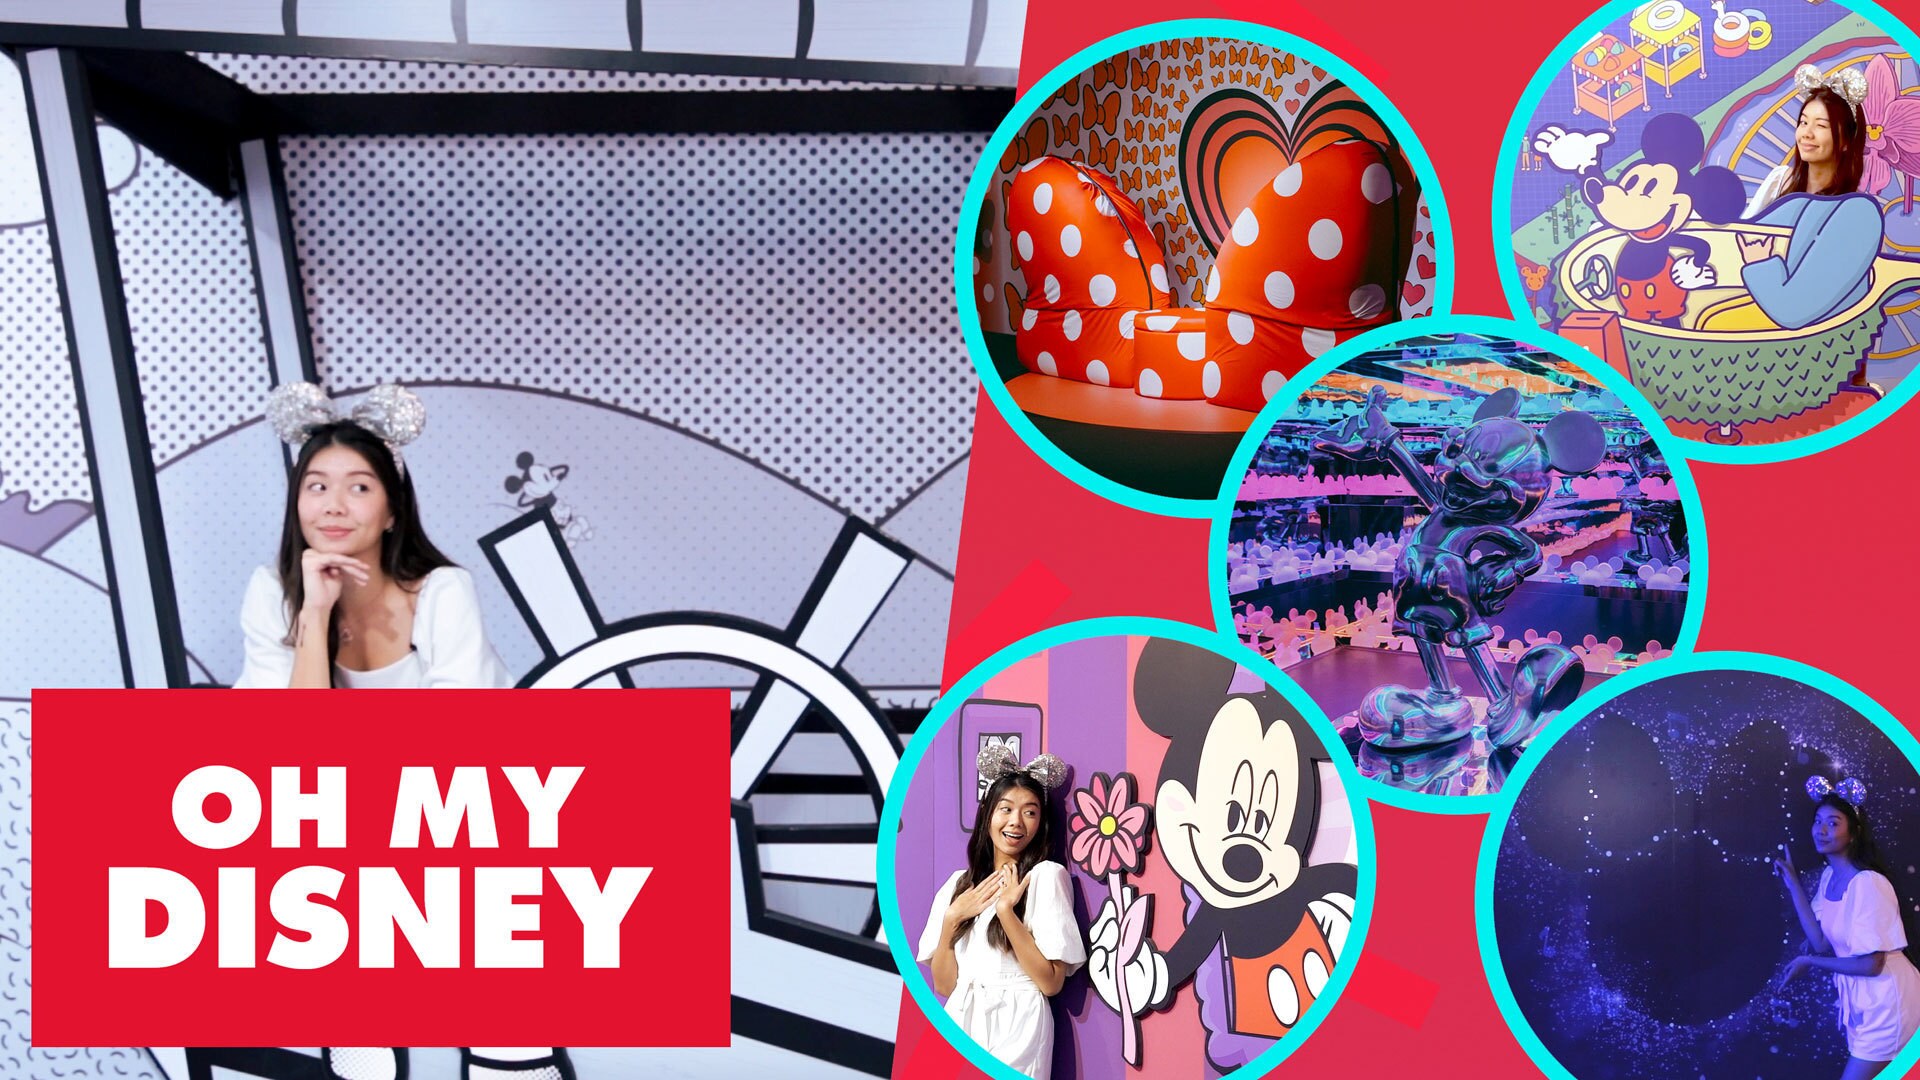 Come and explore Pop-Up Disney! A Mickey Celebration in Singapore!